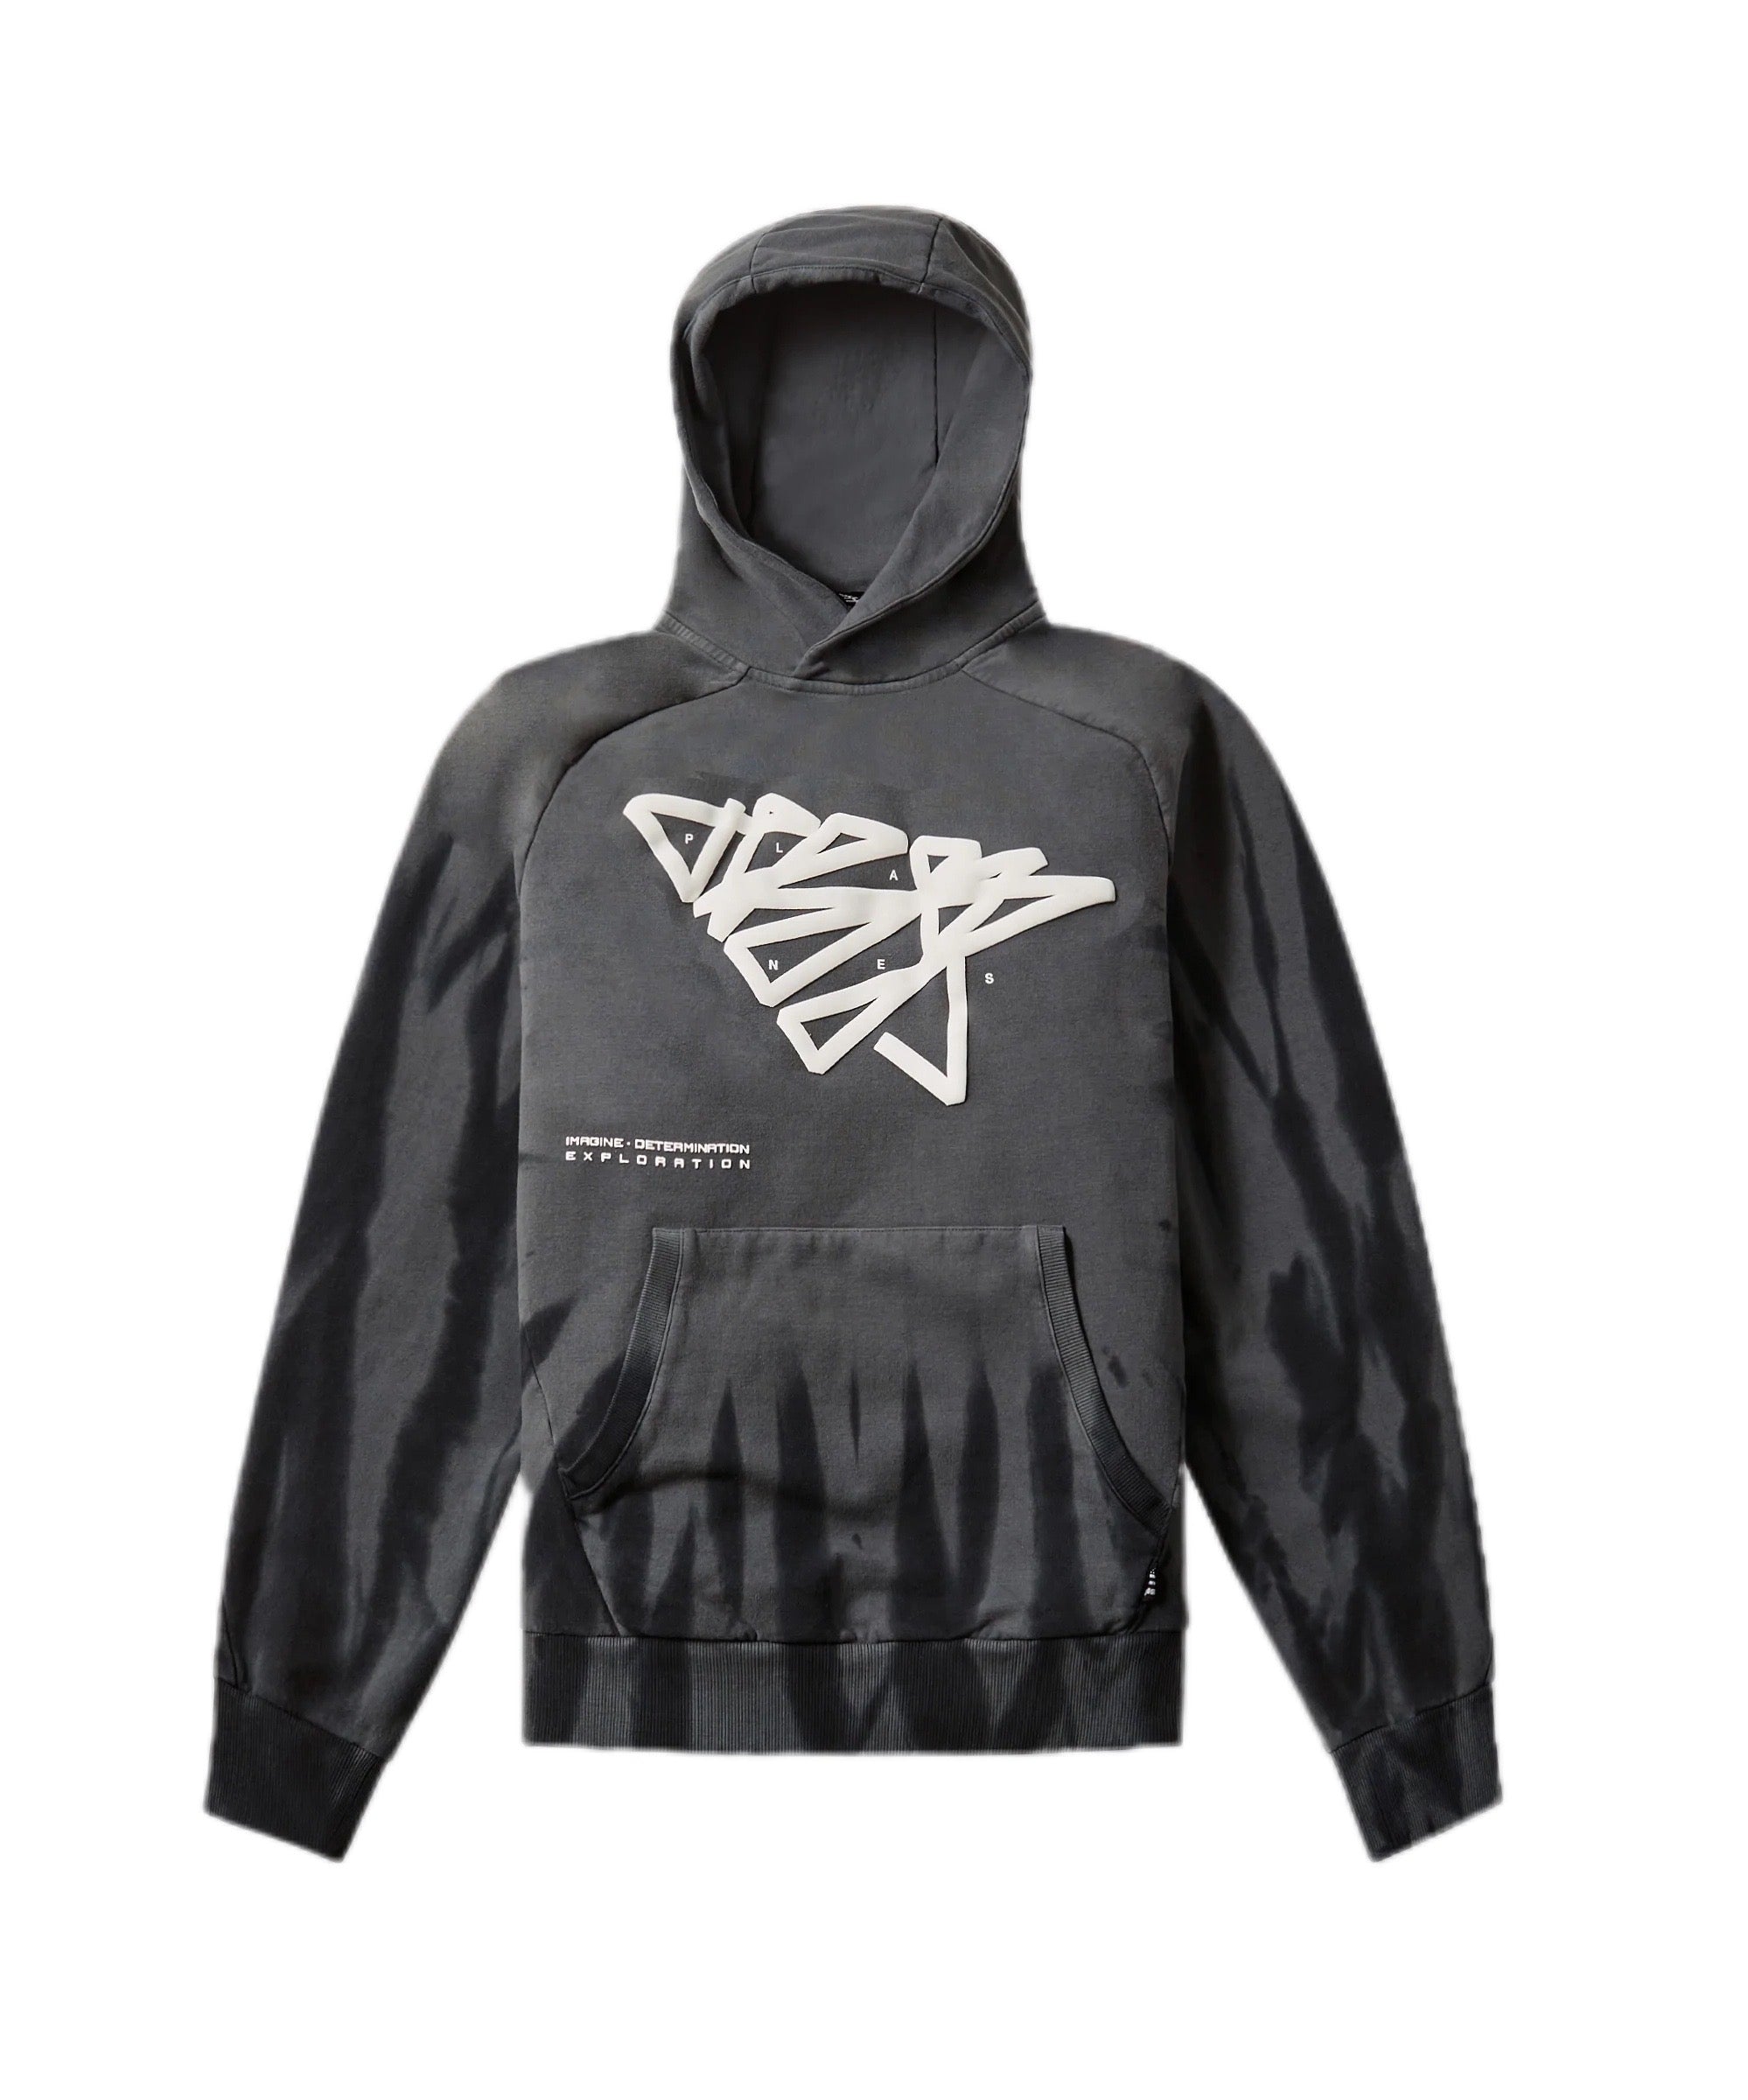 PAPER PLANES "PATH TO GREATNESS" HOODIE